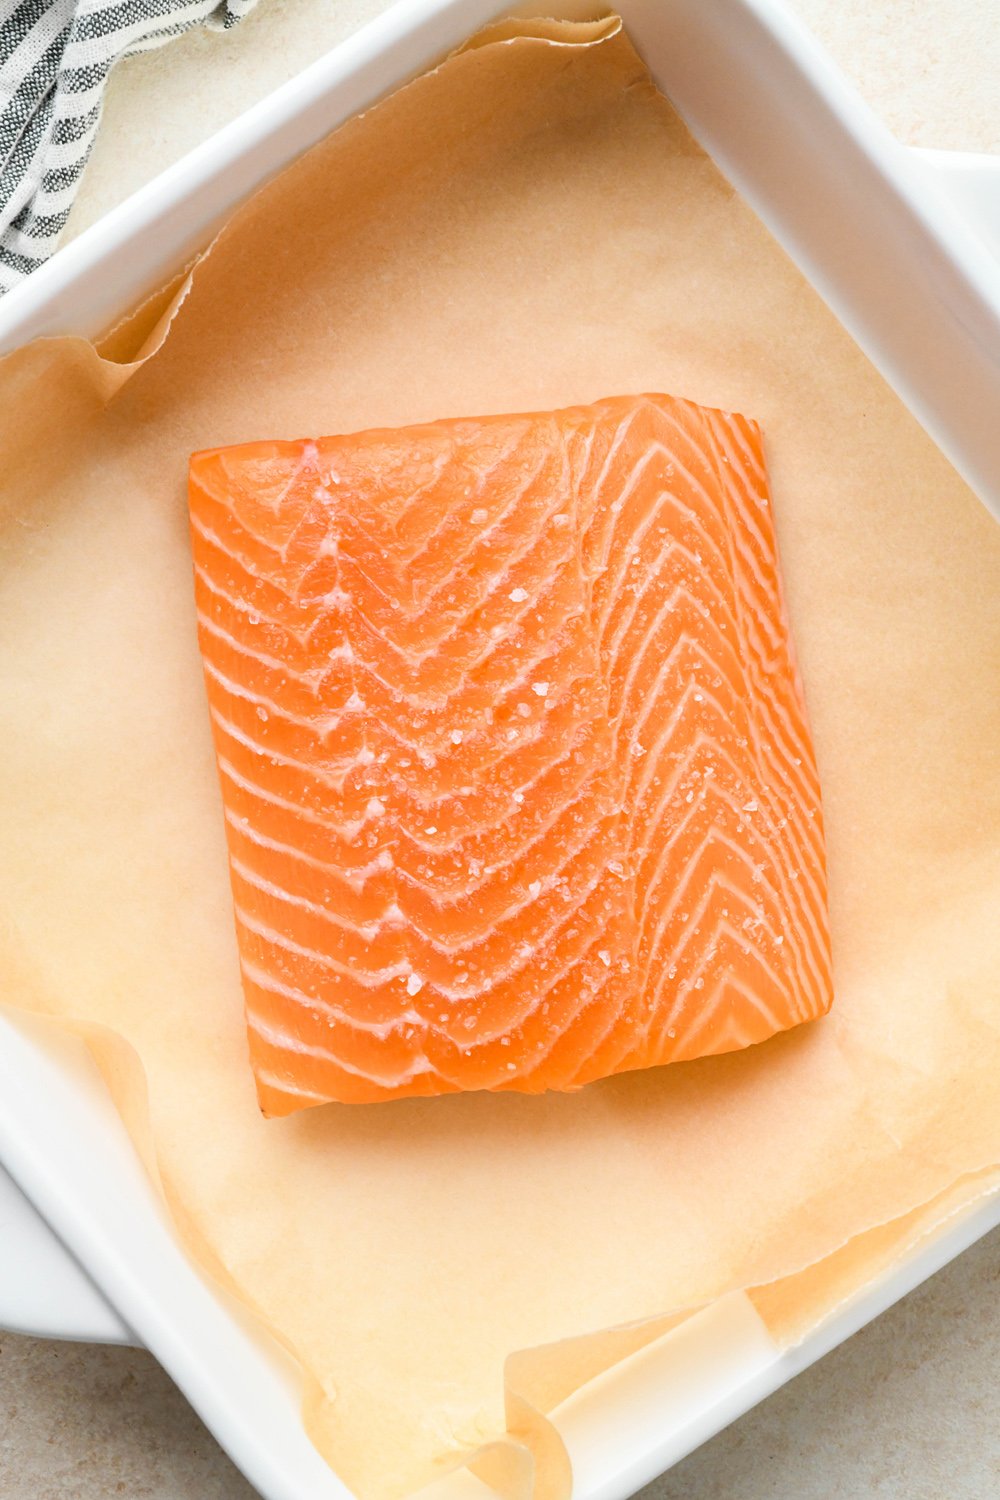 How to make garlic ginger salmon: Salted salmon filet in a small white square baking dish lined with parchment paper.